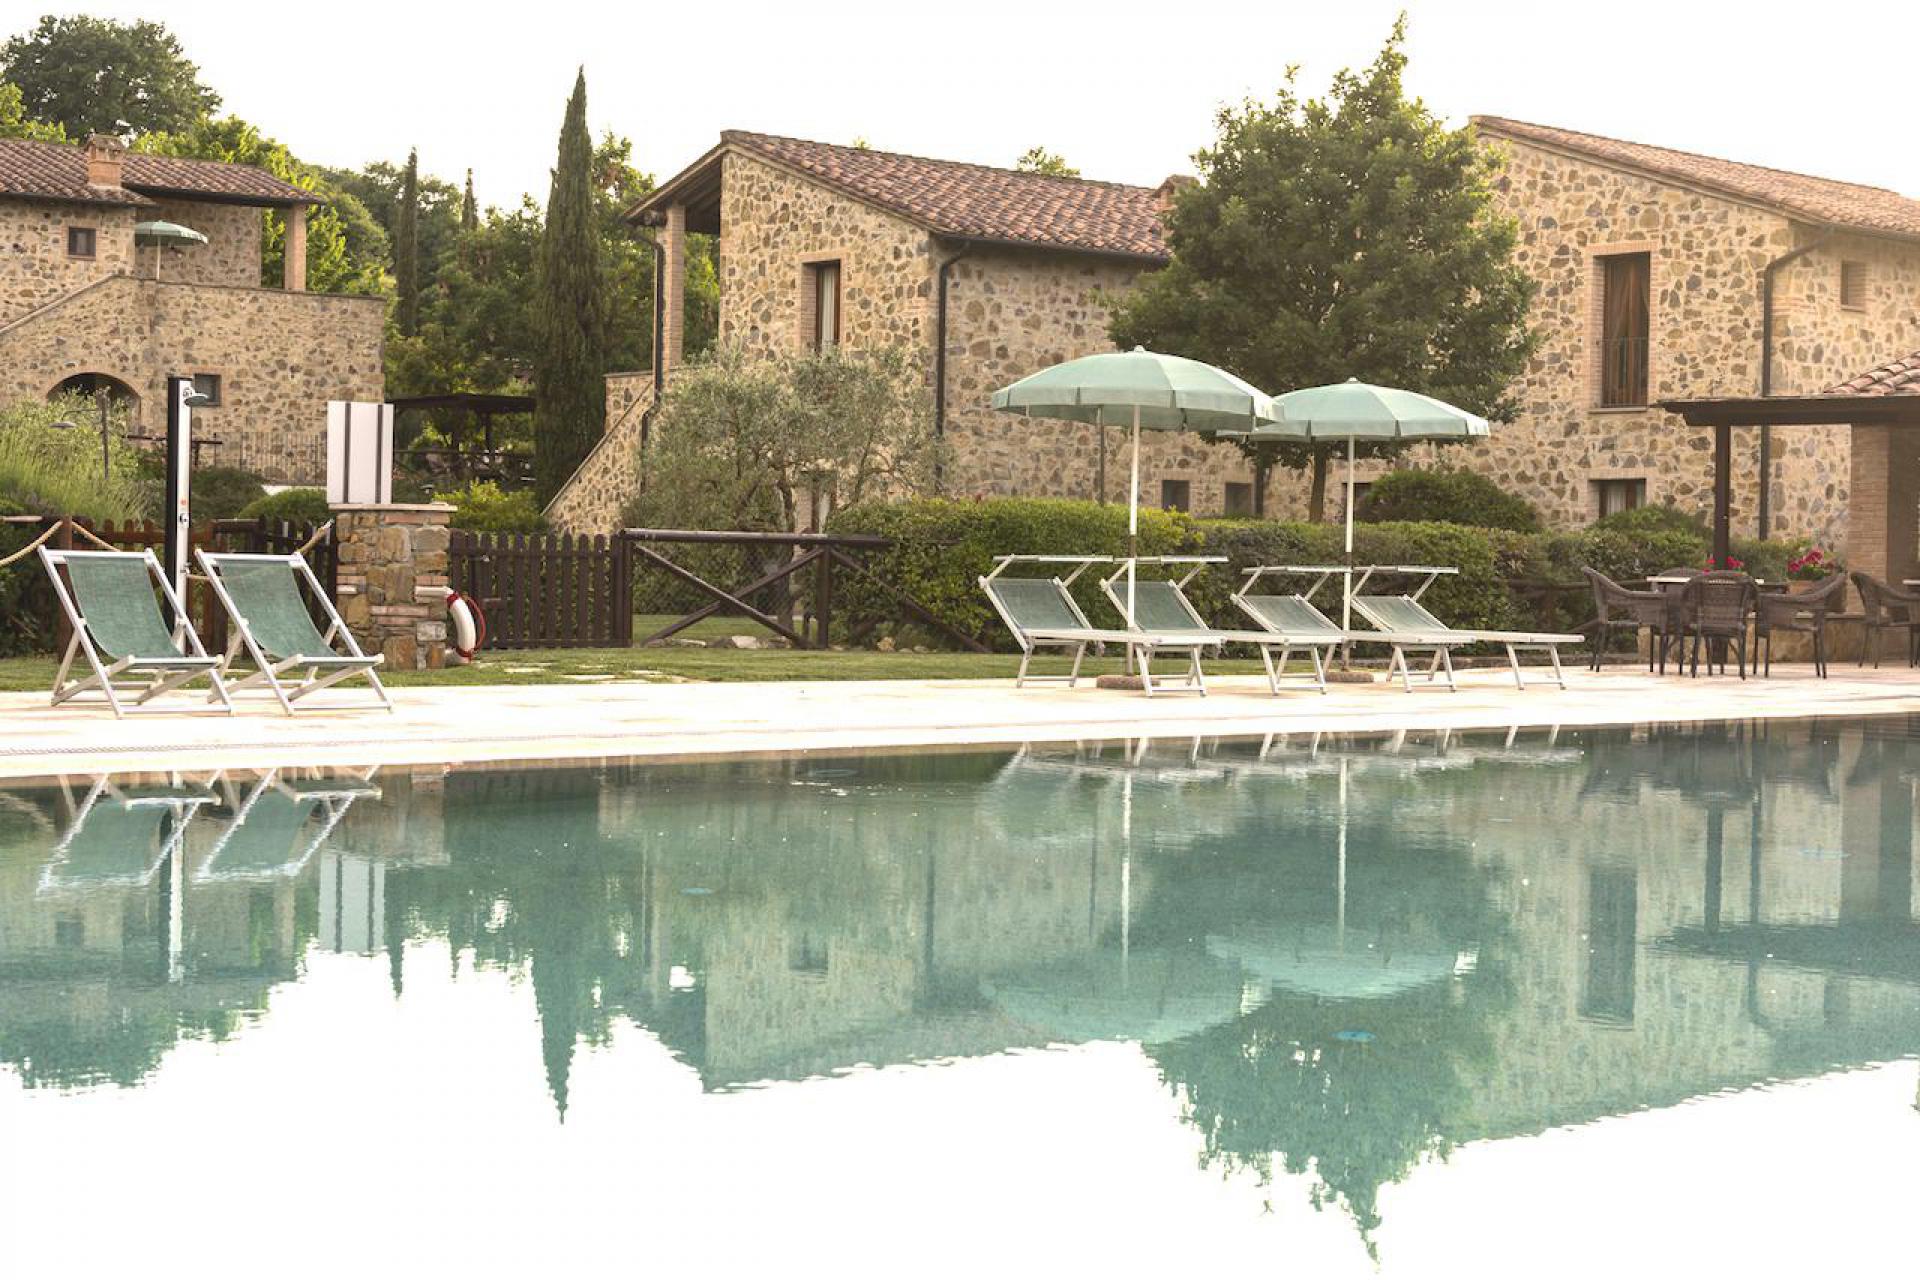 Tuscan country resort with 4 beautiful pools